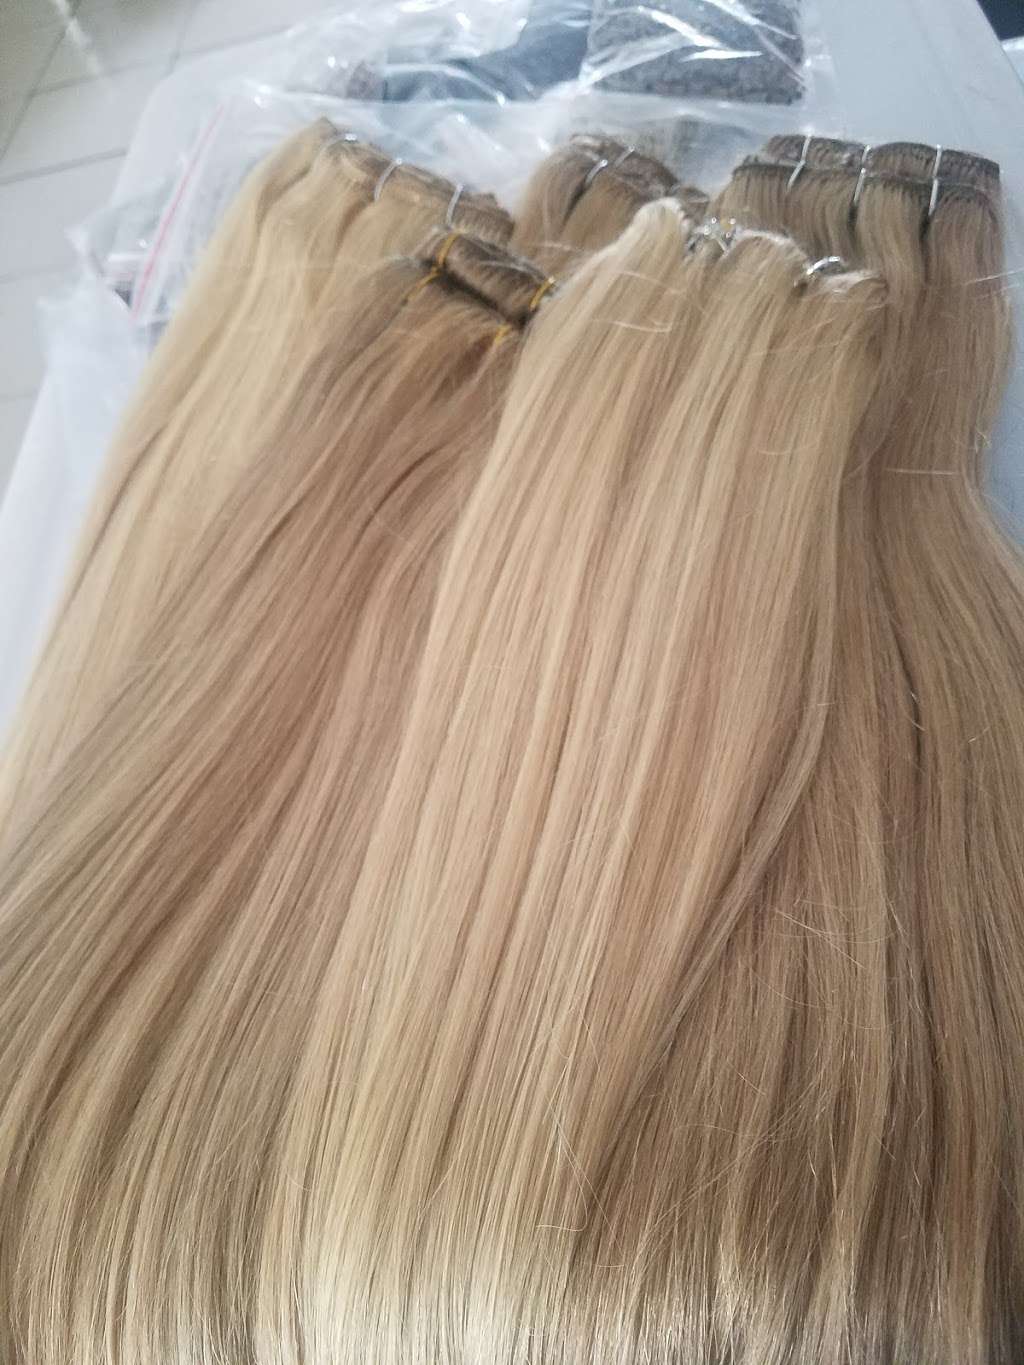 Higher-QualityHairExtensions | 6042, 10132 San Gabriel Ave, South Gate, CA 90280 | Phone: (323) 439-4446